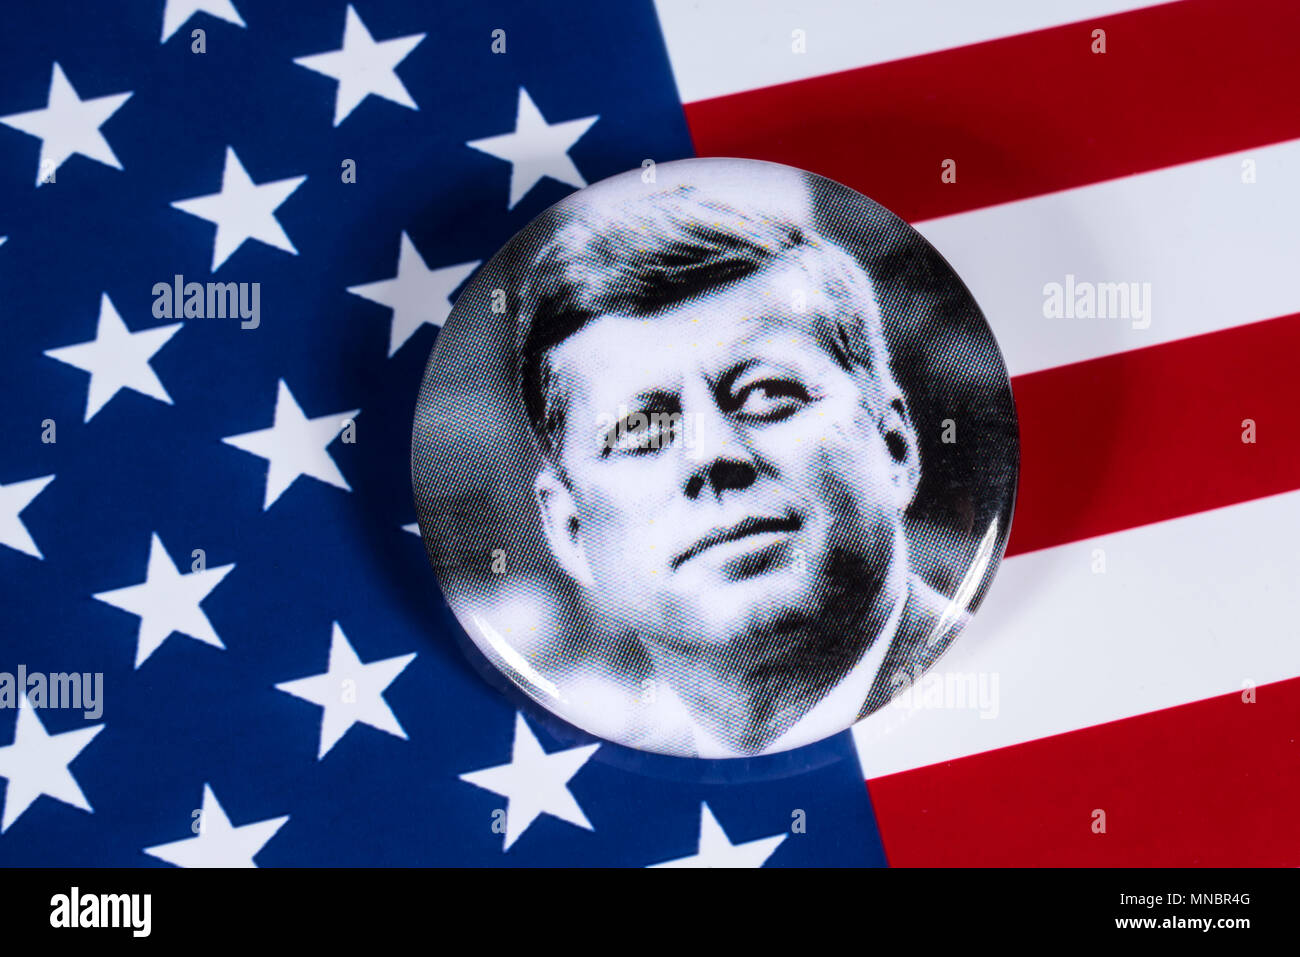 LONDON, UK - APRIL 27TH 2018: A John F. Kennedy badge pictured over the USA Flag, on 27th April 2018.  John F Kennedy was the 35th President of the Un Stock Photo